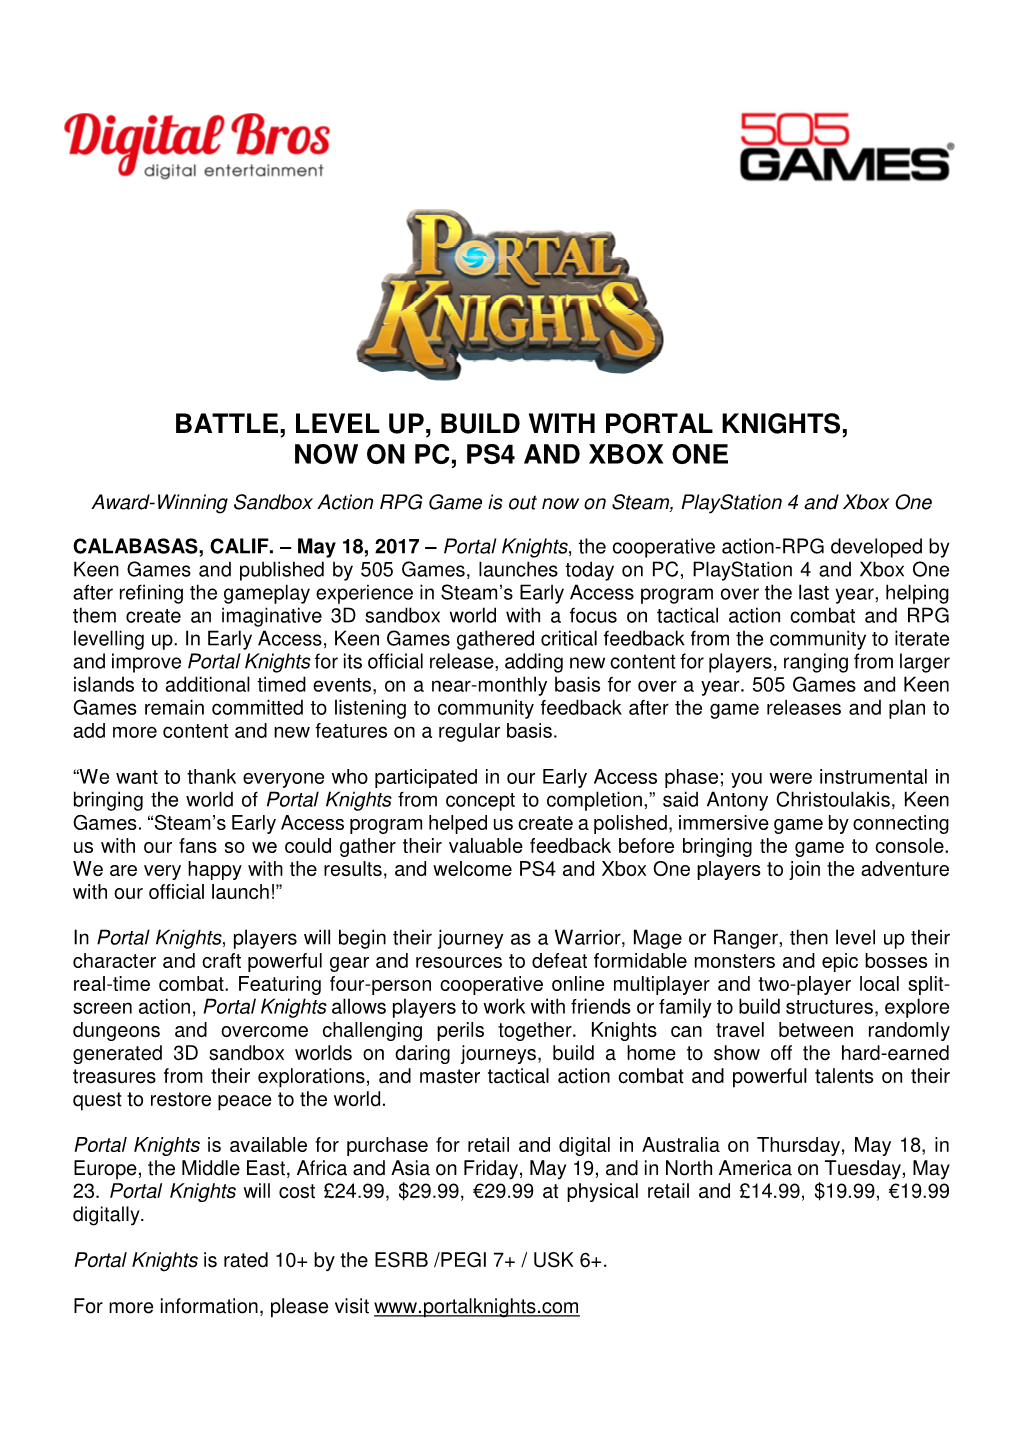 Battle, Level Up, Build with Portal Knights, Now on Pc, Ps4 and Xbox One